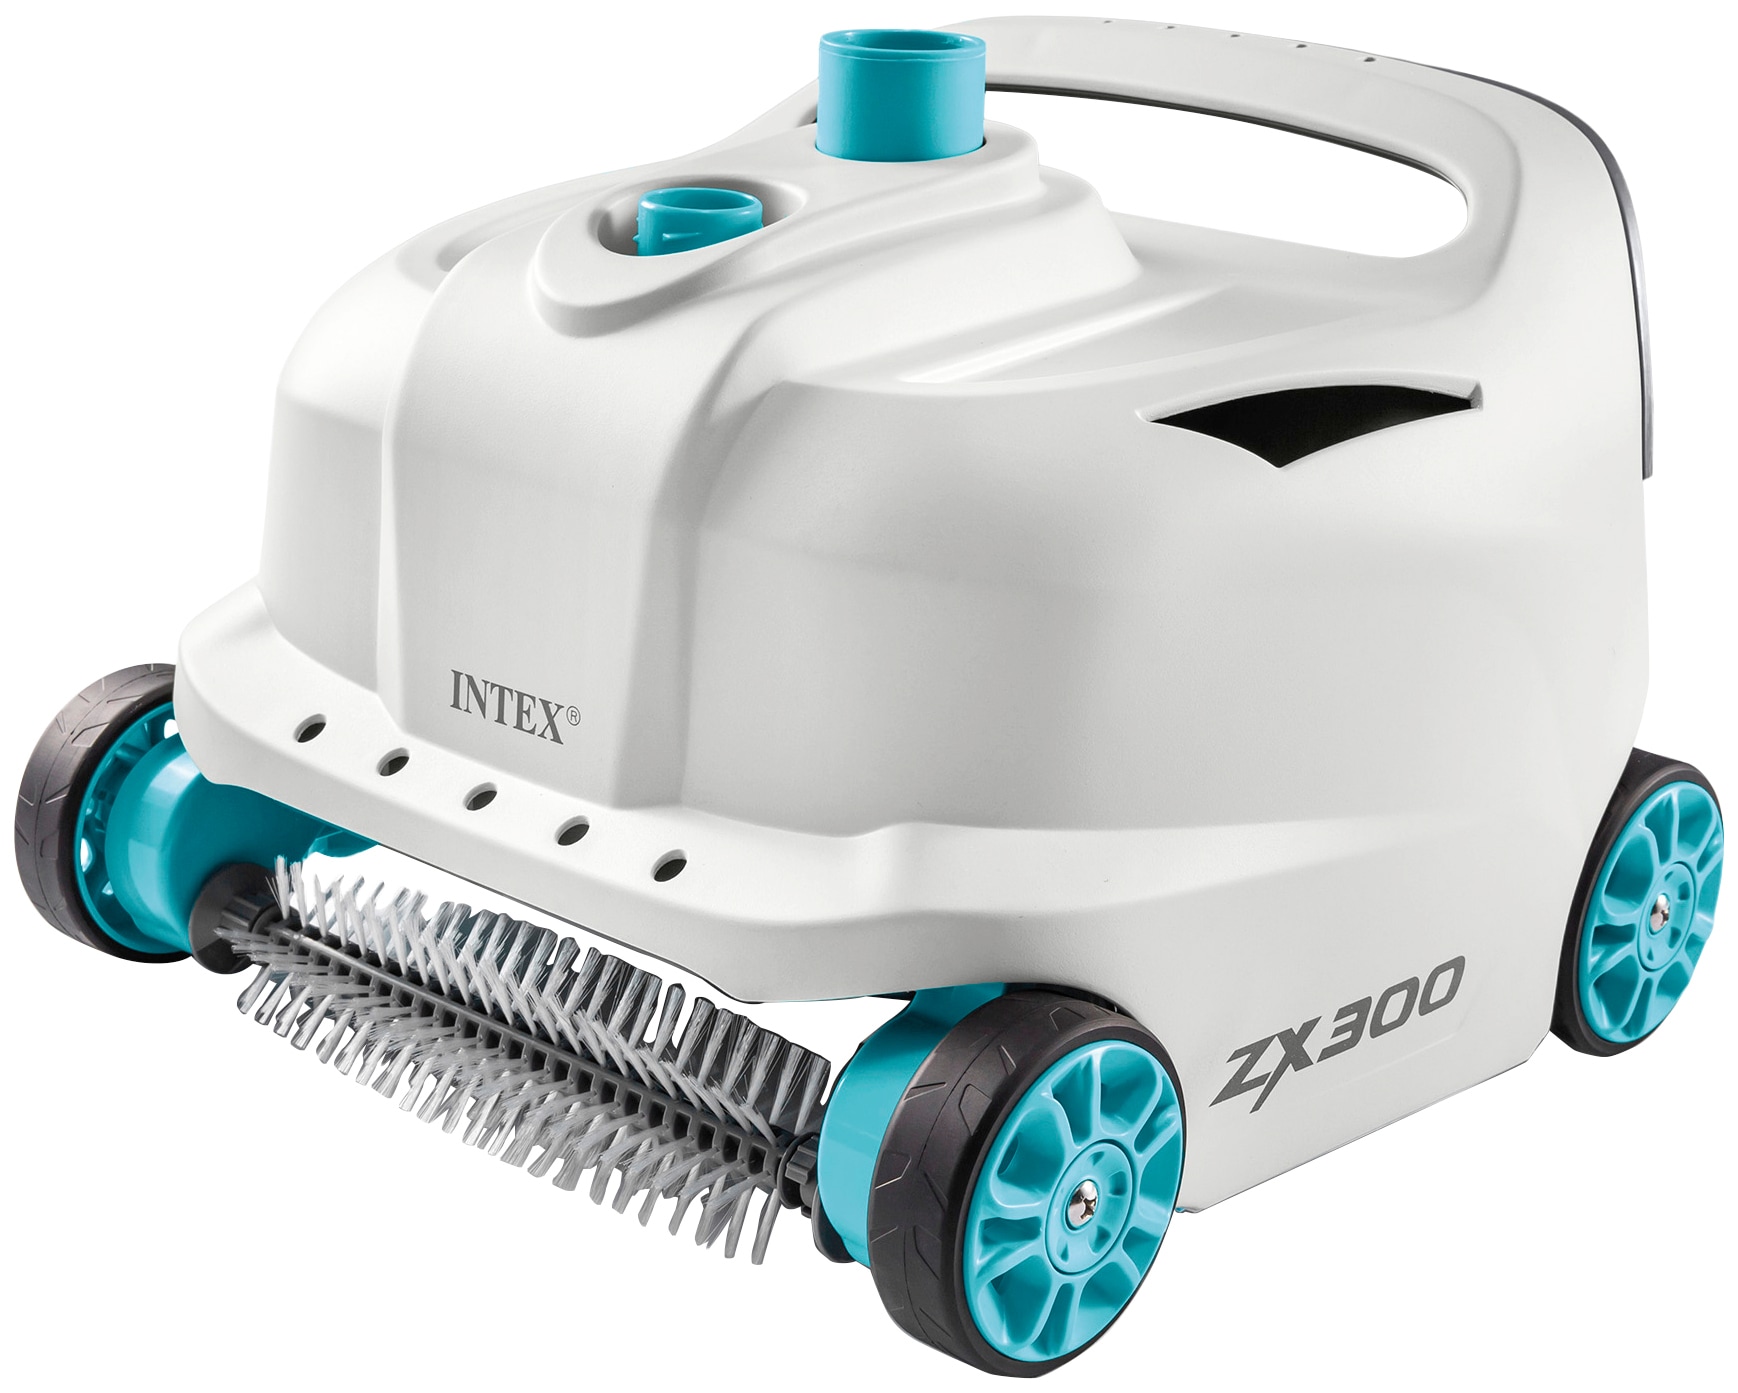 Intex Poolbodensauger "Pool-Cleaner Deluxe ZX300", inkl. Schlauch